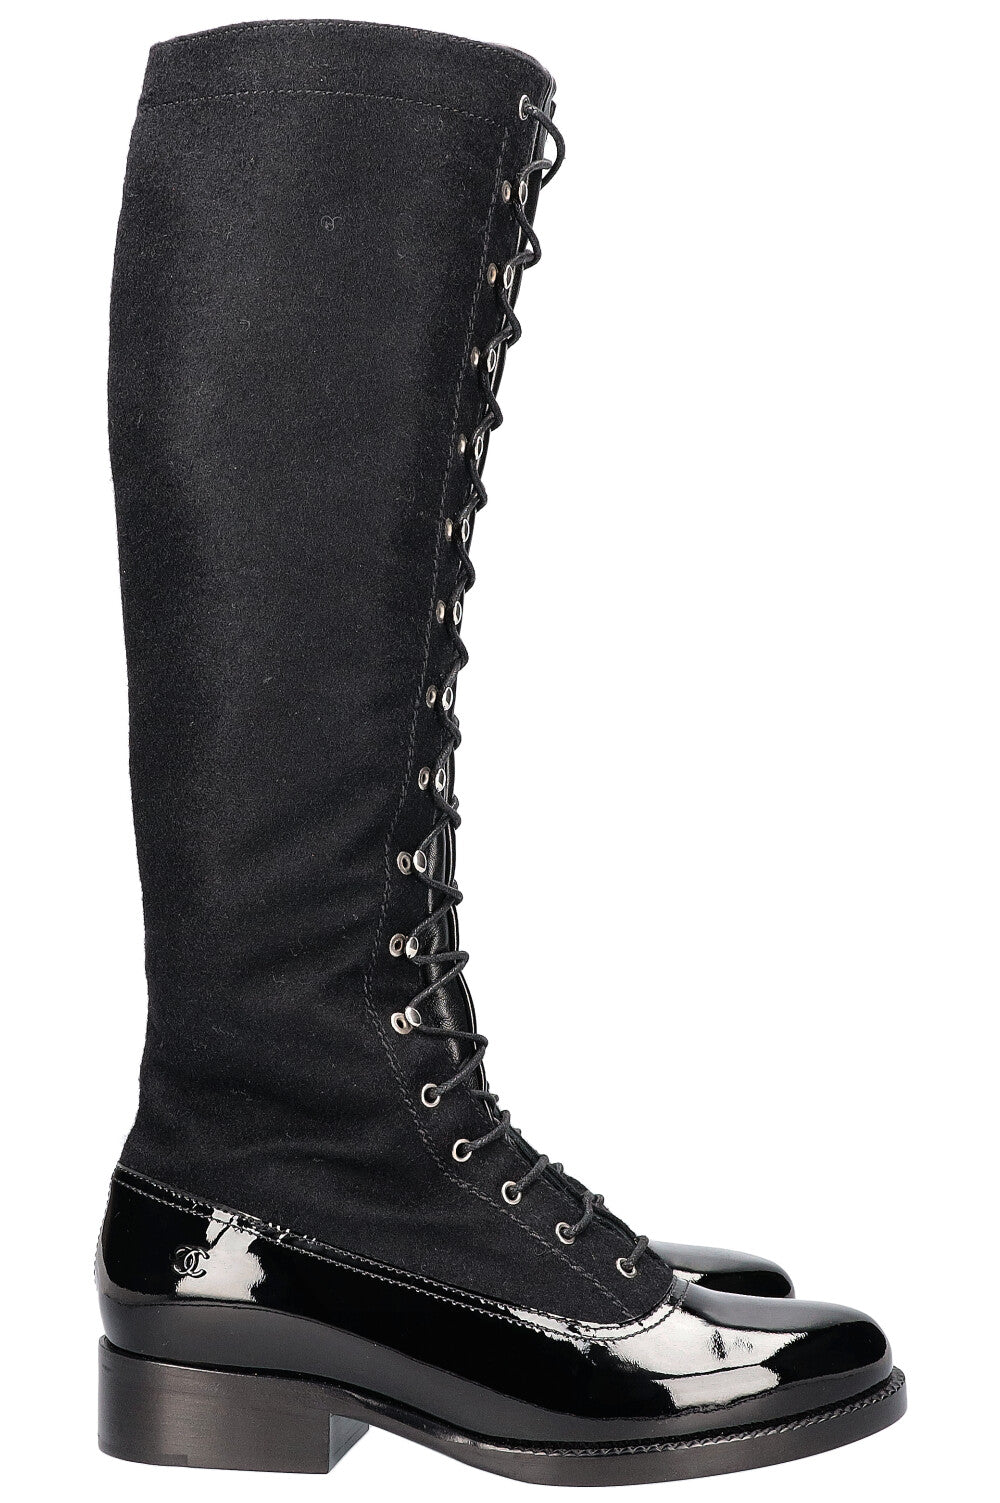 Chanel Lace Up Boots Sale Online  xevietnamcom 1688051300